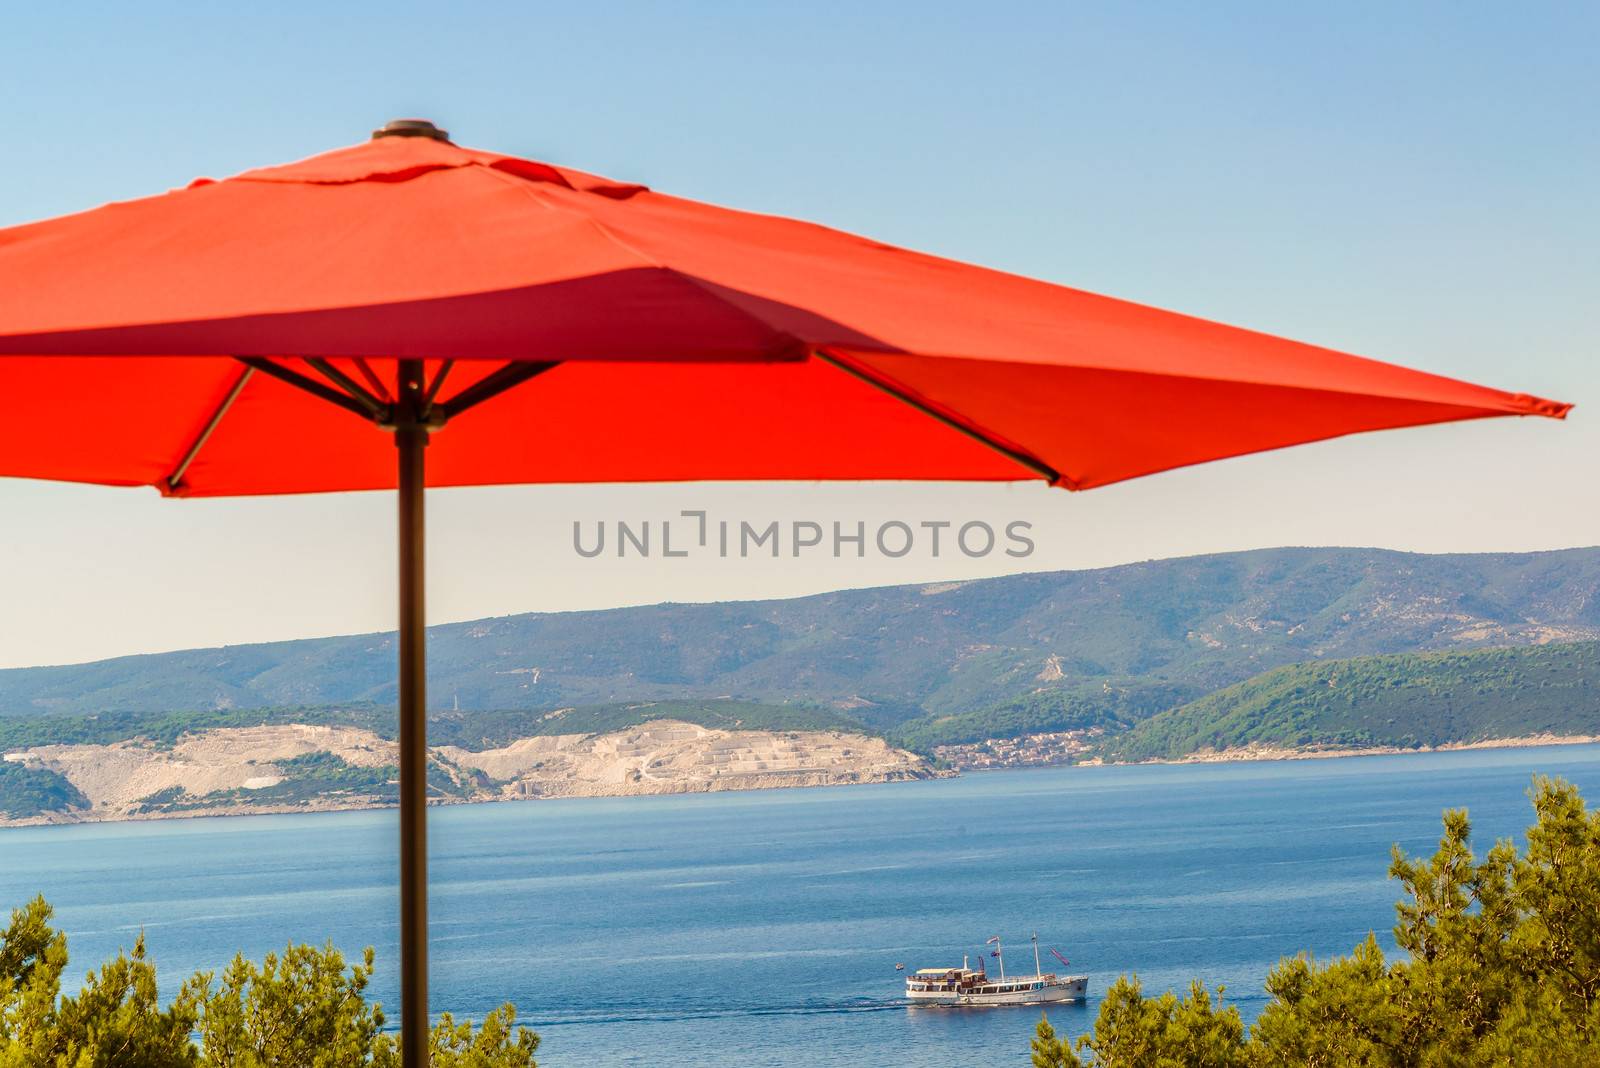 Red terrace, garden umbrella against blue sea and cloudless sky, visible coastline, ship in distance.